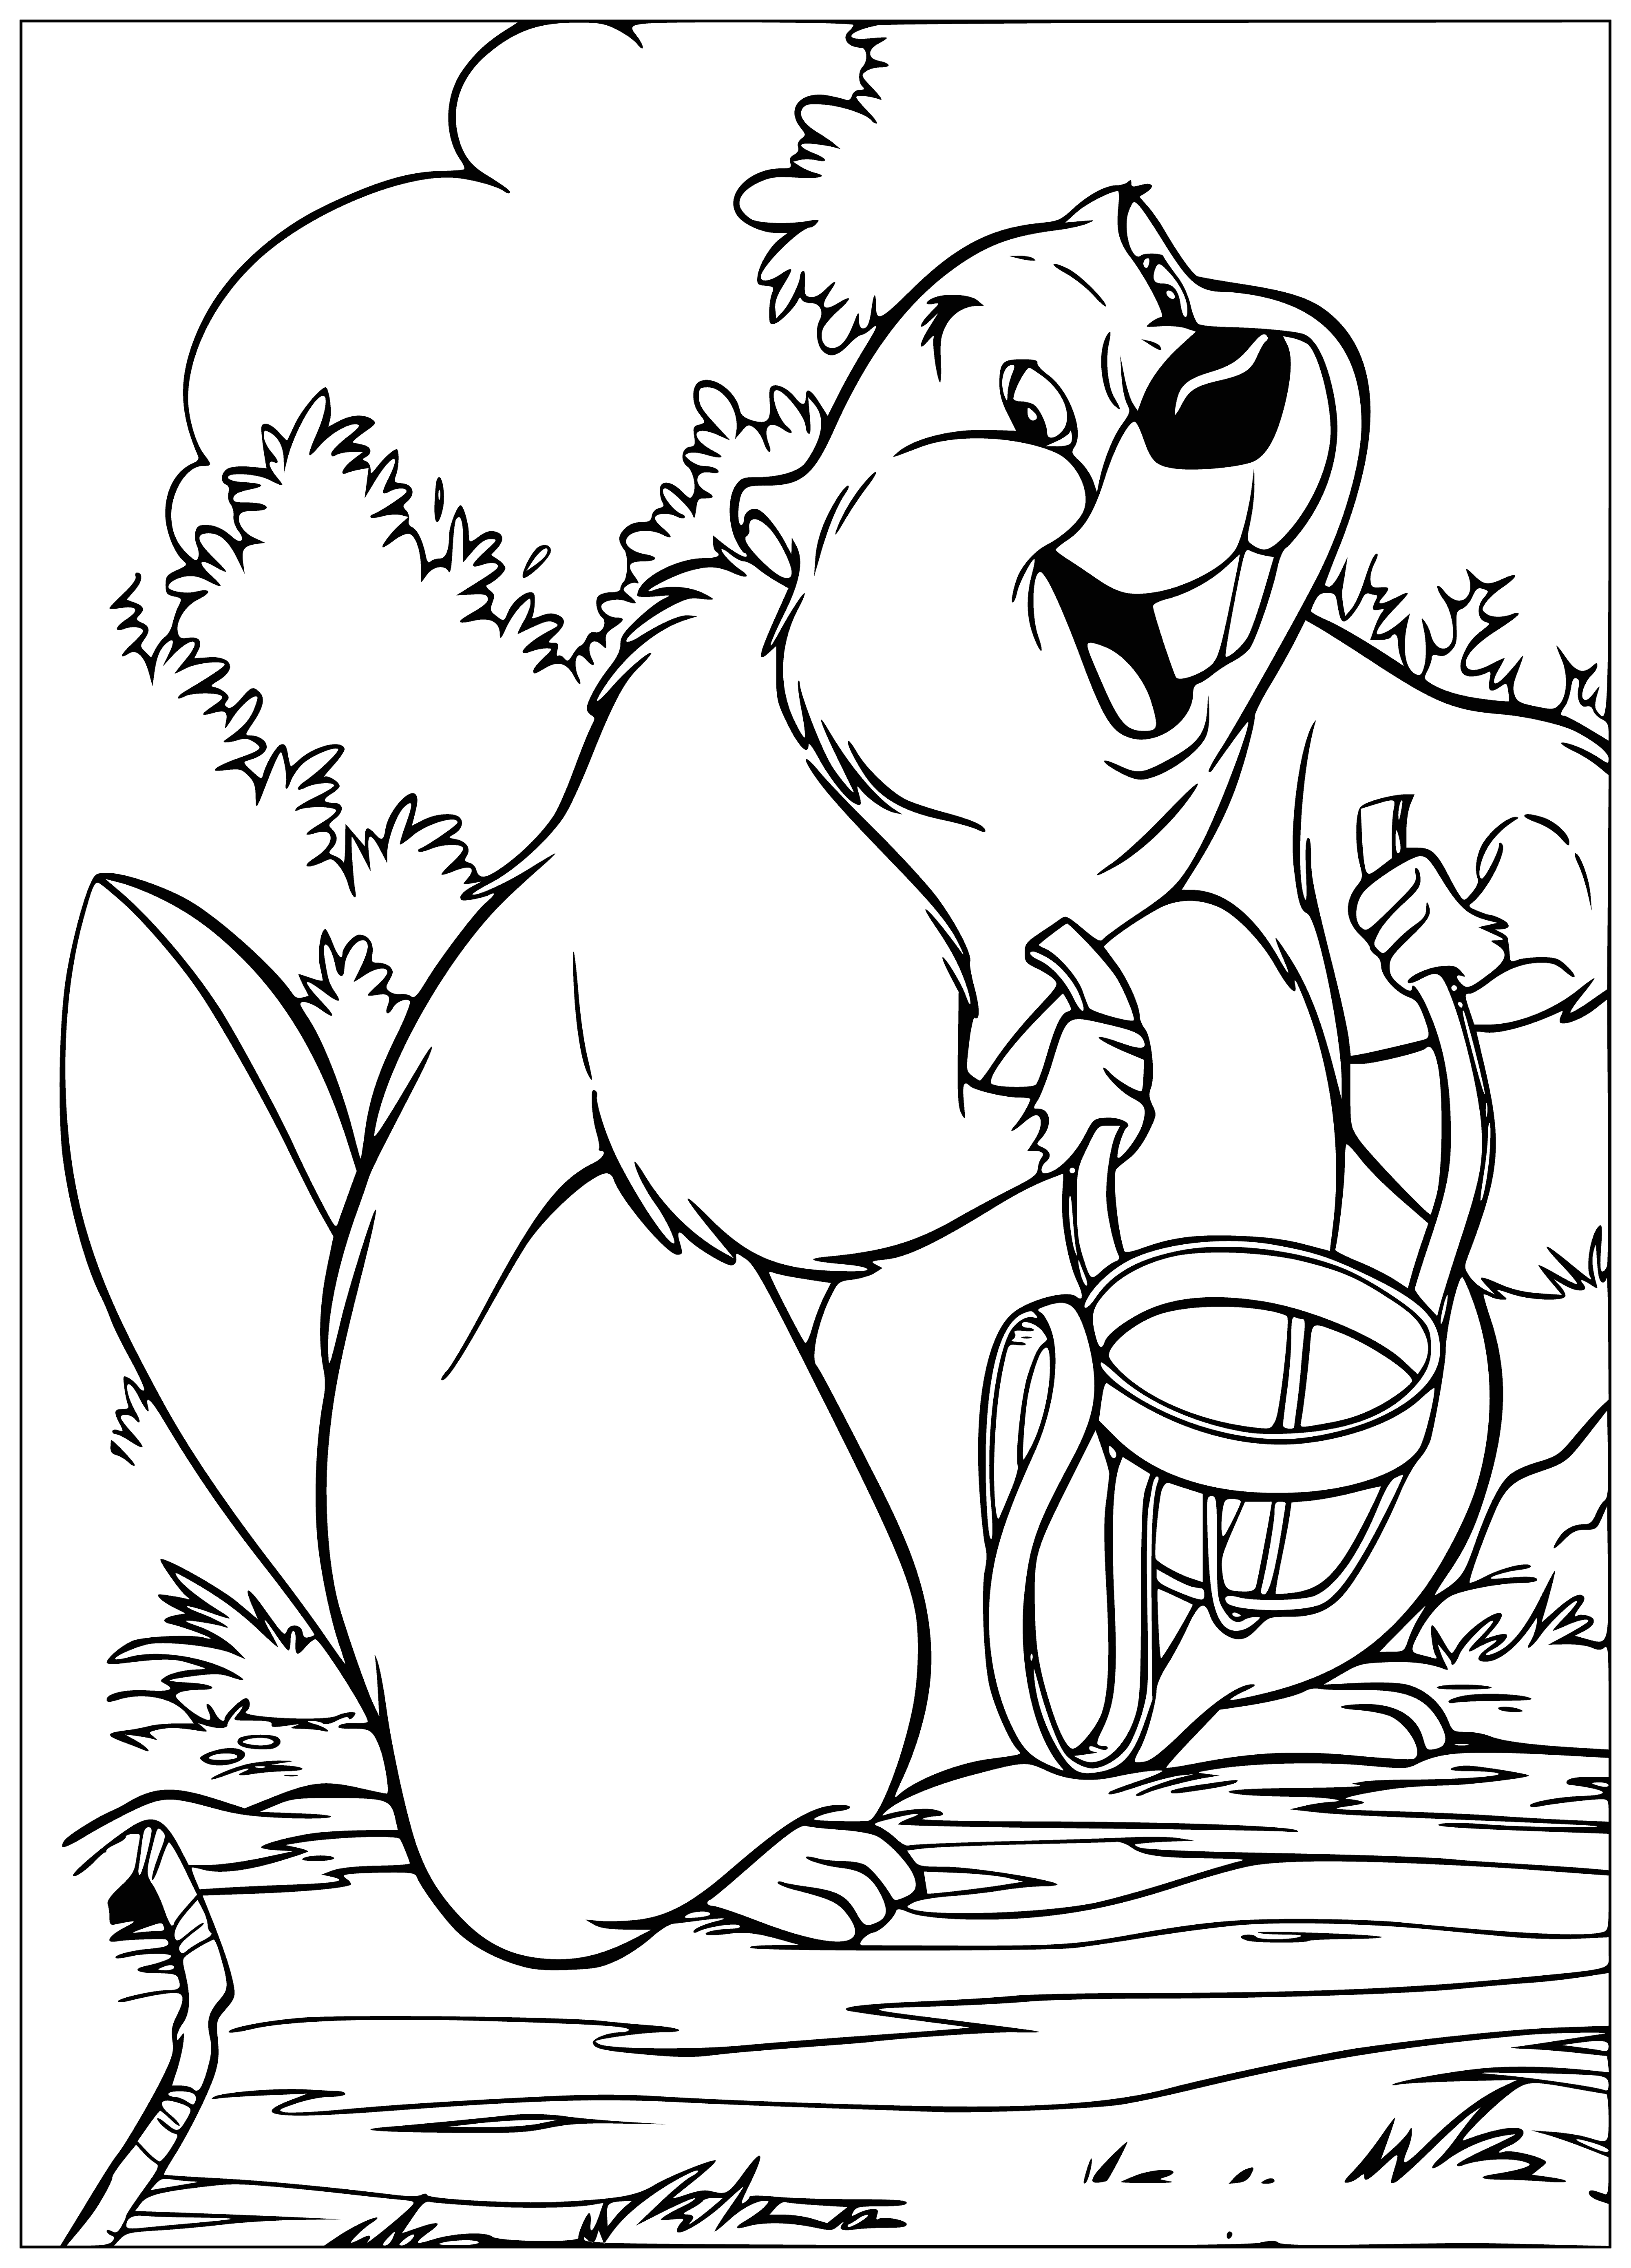 coloring page: An orange beaver with wet fur, large eyes, and puffed out cheeks sits on a log in a river. Its teeth are visible, and its tail is flat.